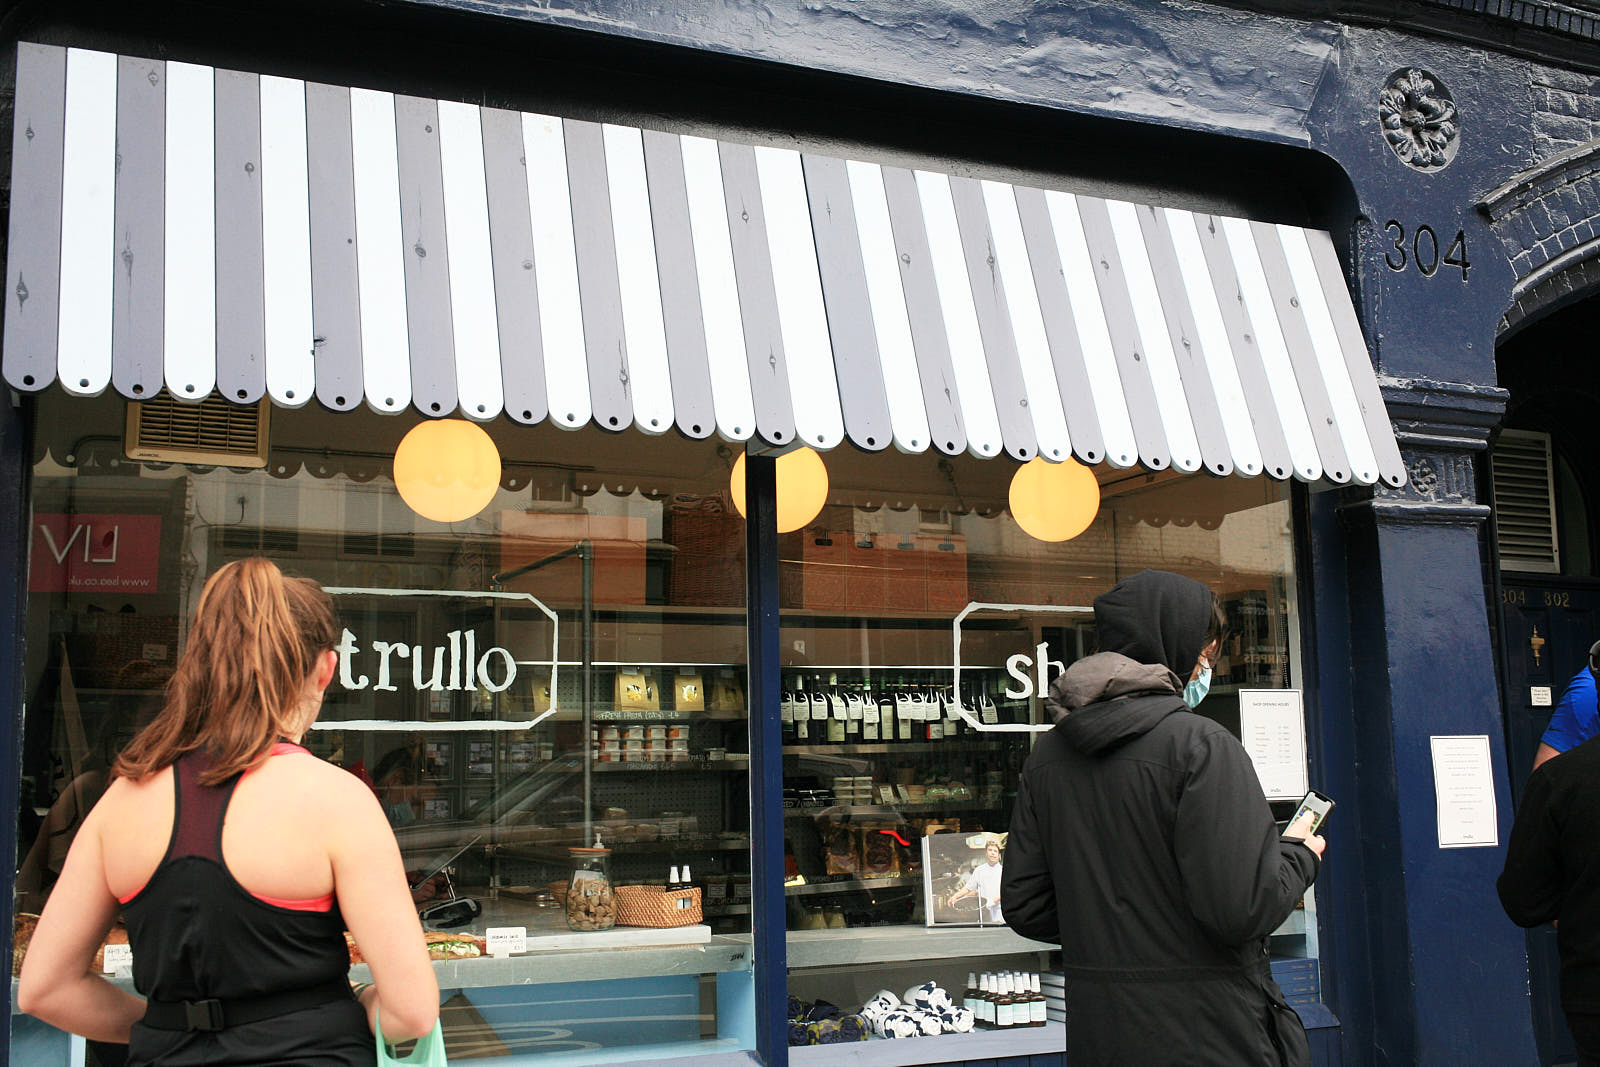 Customers queue outside Trullo, the Italian restaurant in Islington, with a striped awning overhanging the window